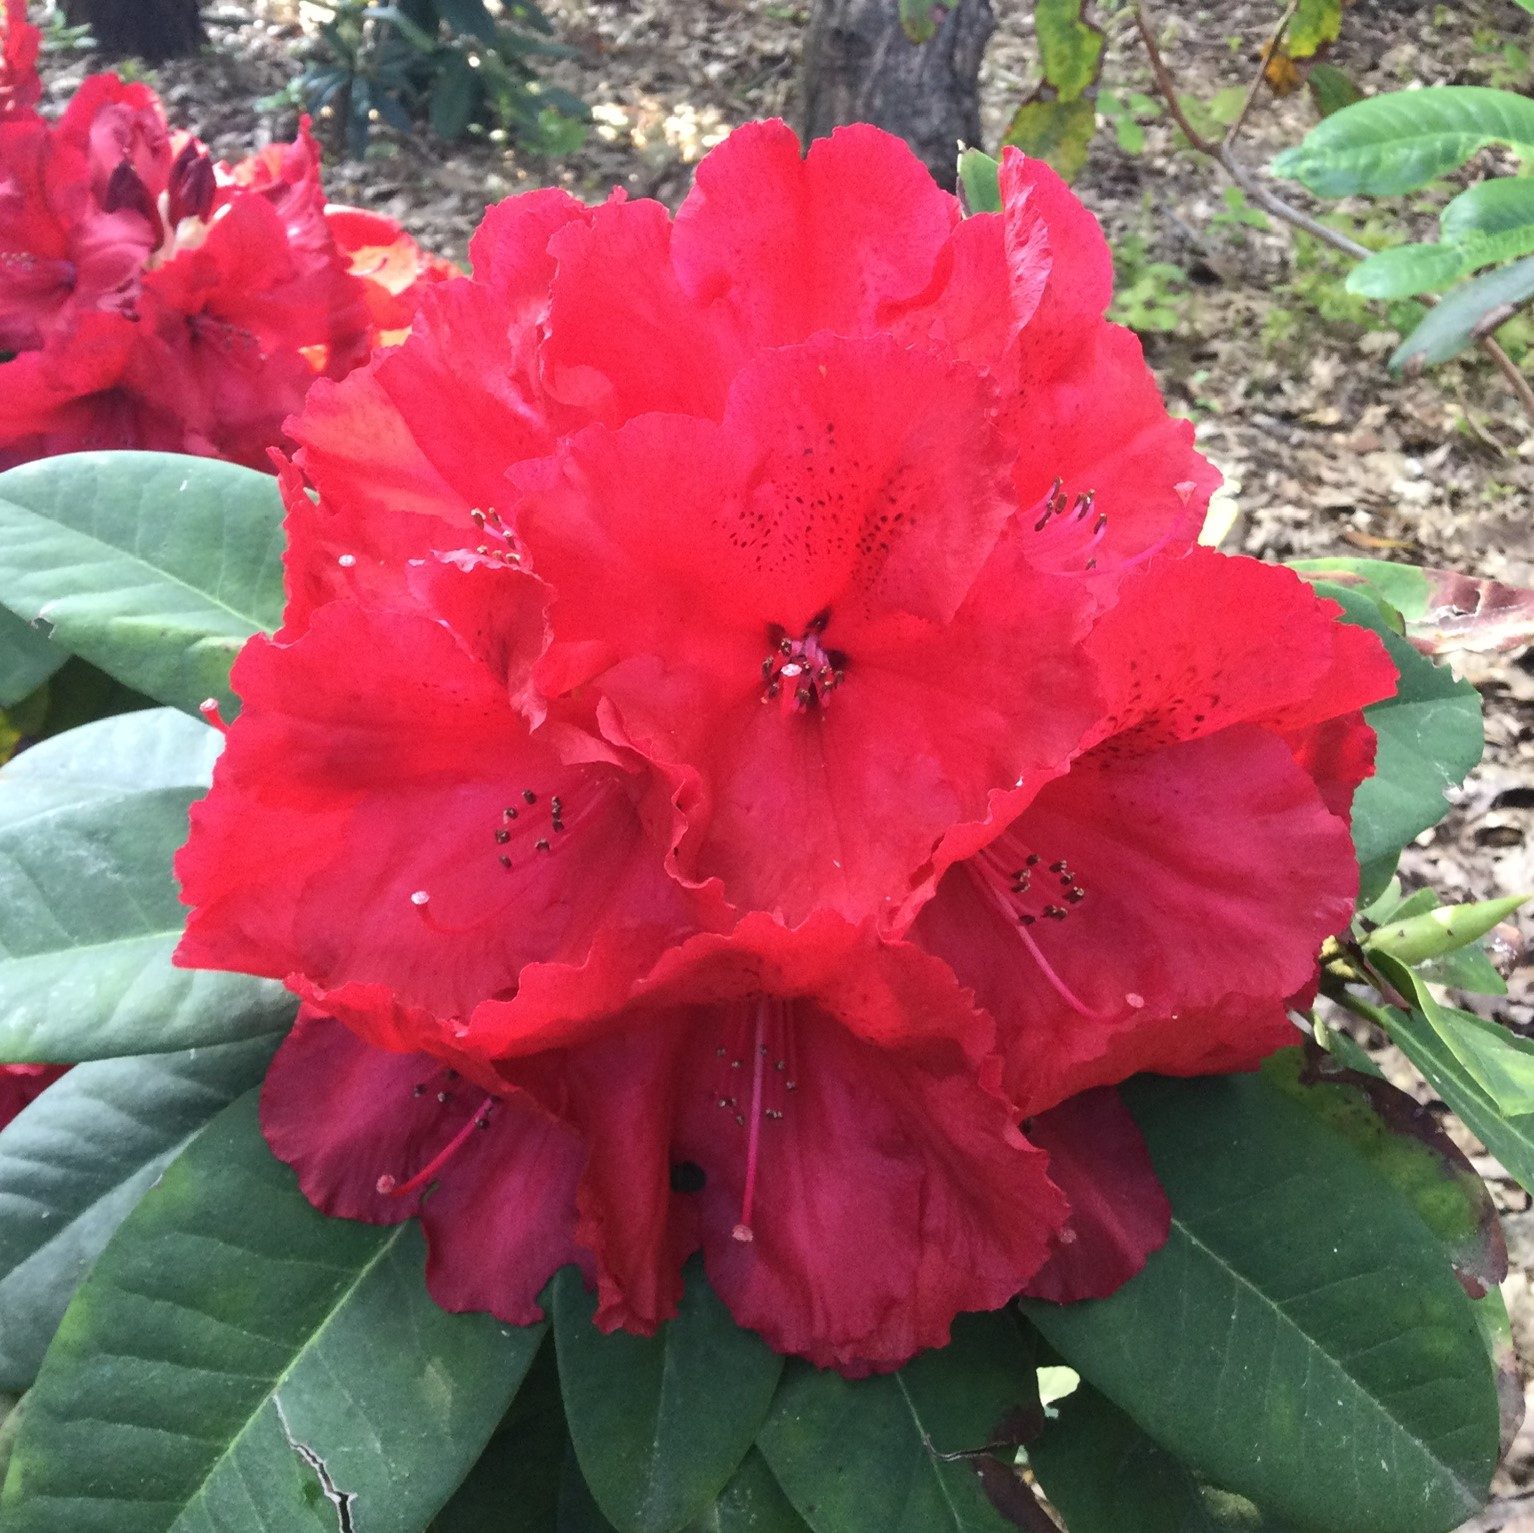 Buy Red Jack - Red Jack Rhododendron online - Millais Nurseries